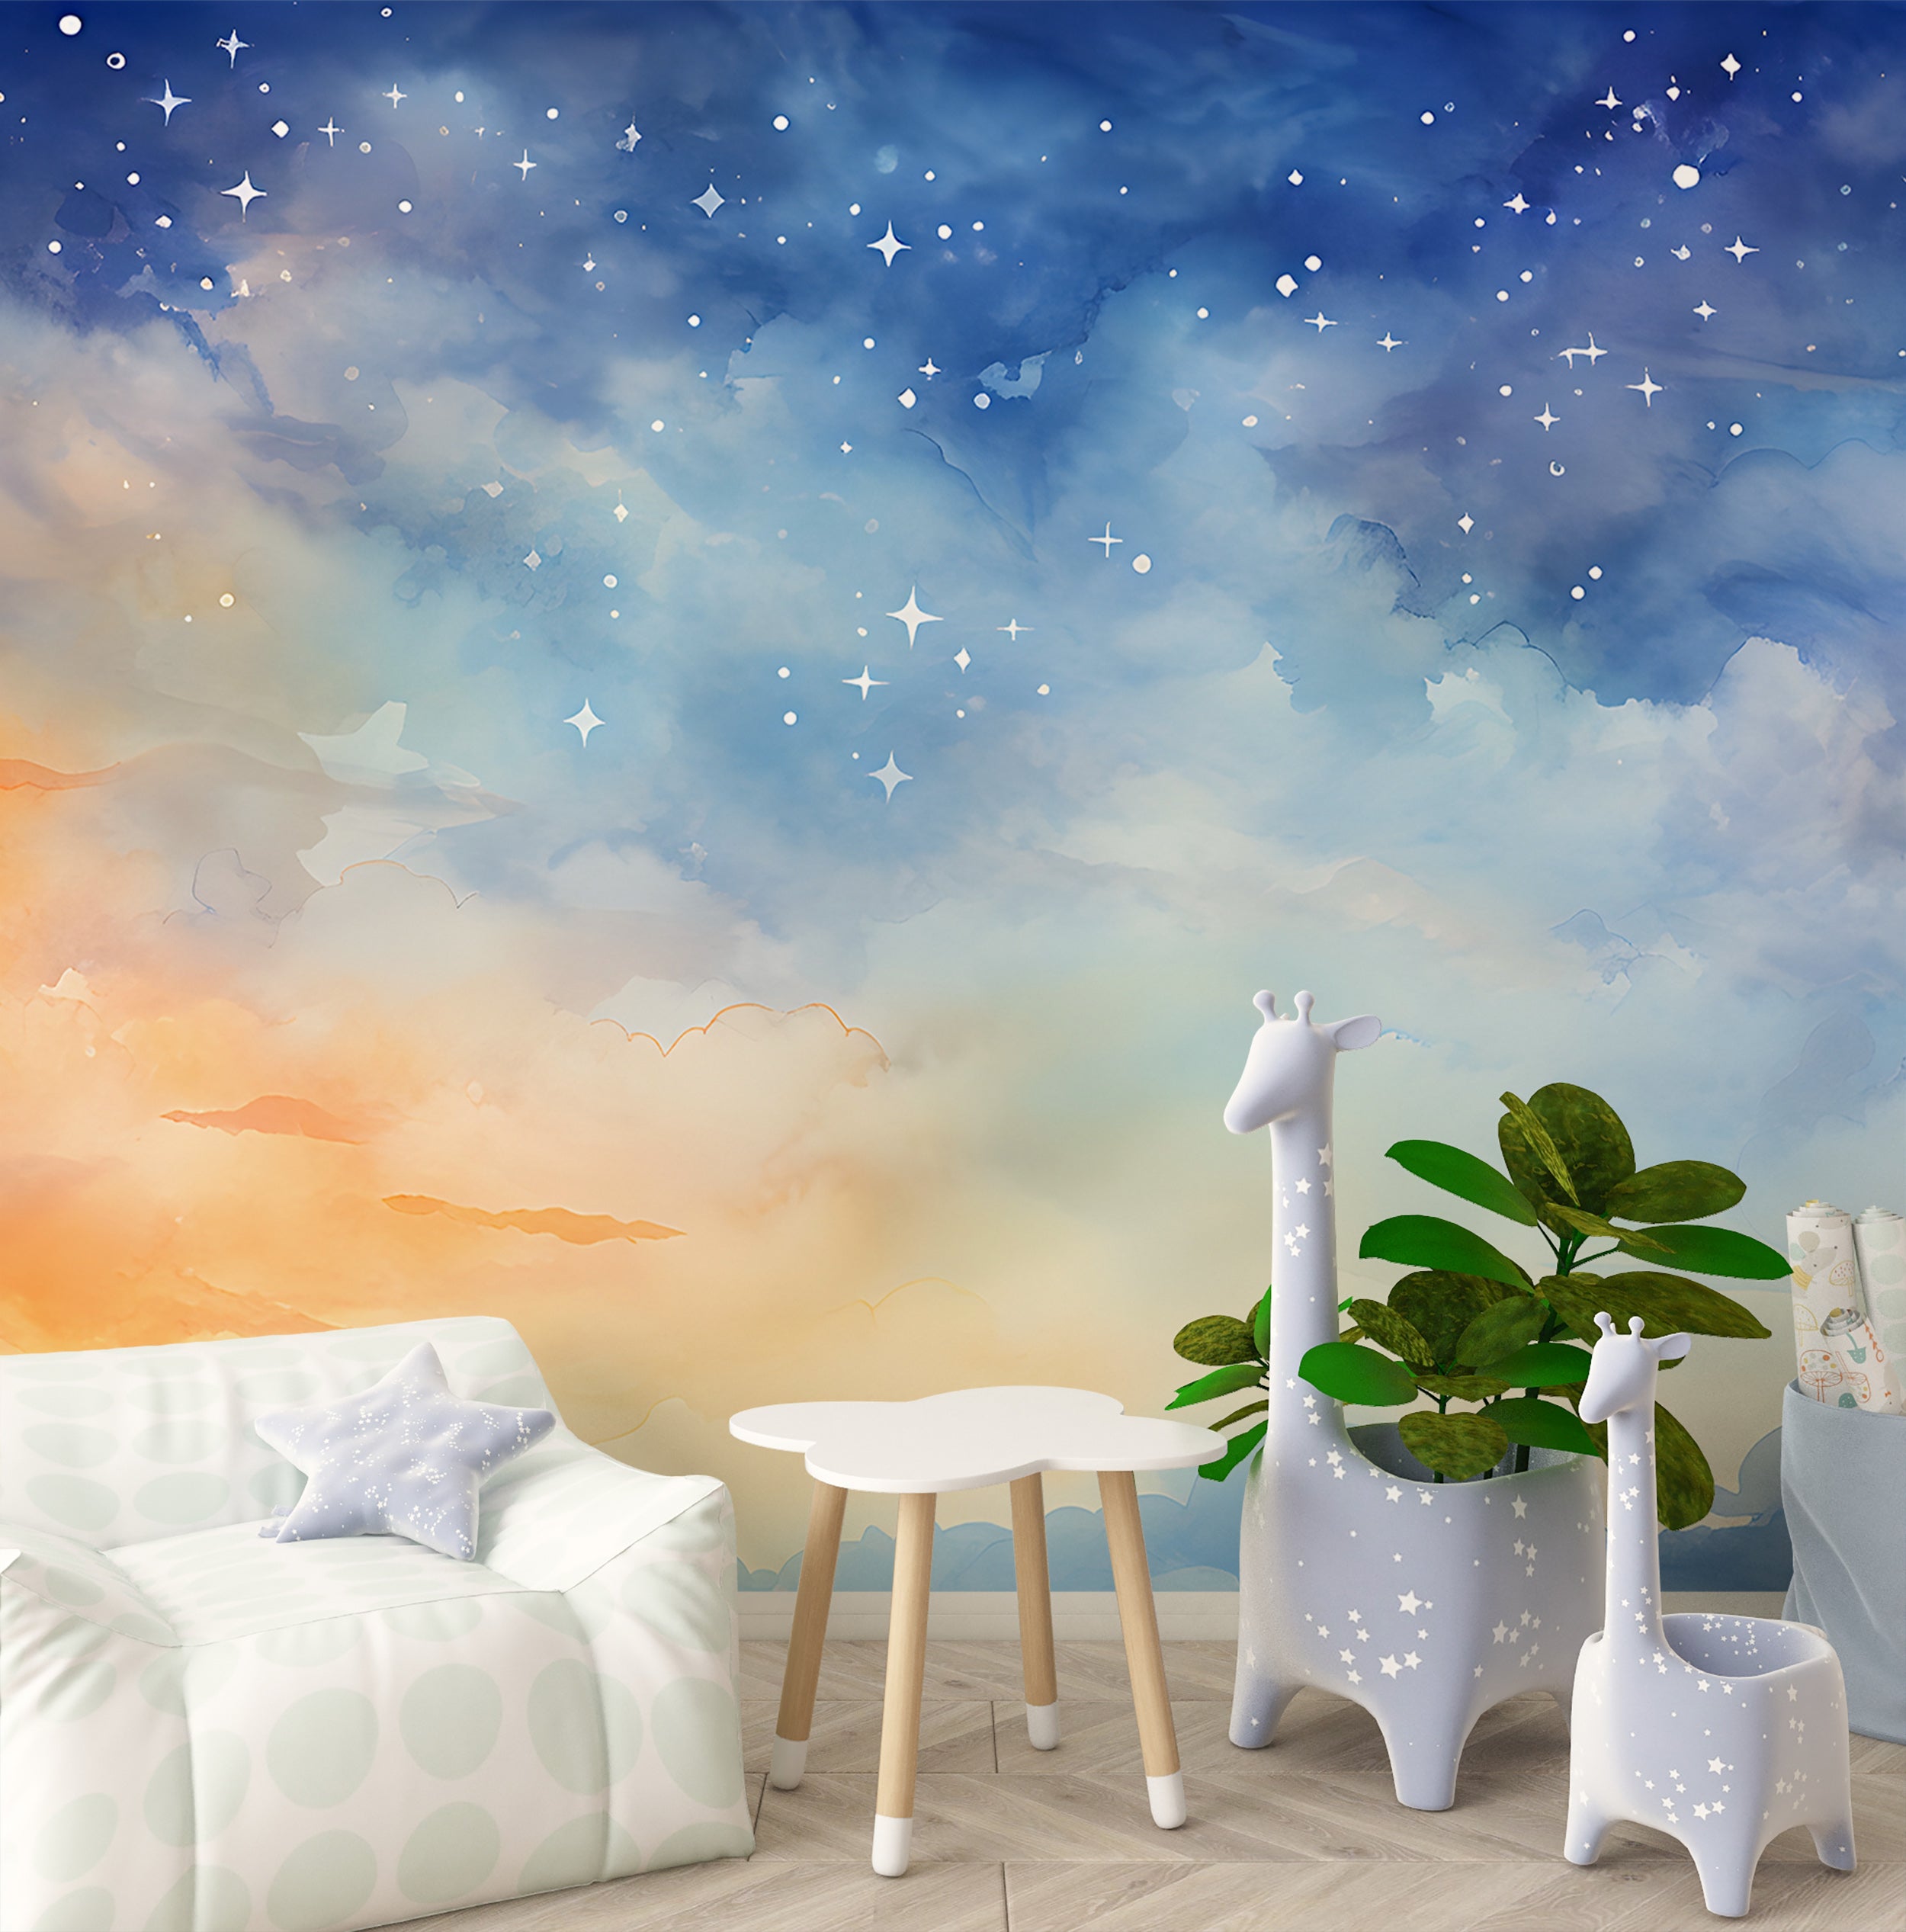 Dreamy Starry Night Wall Covering